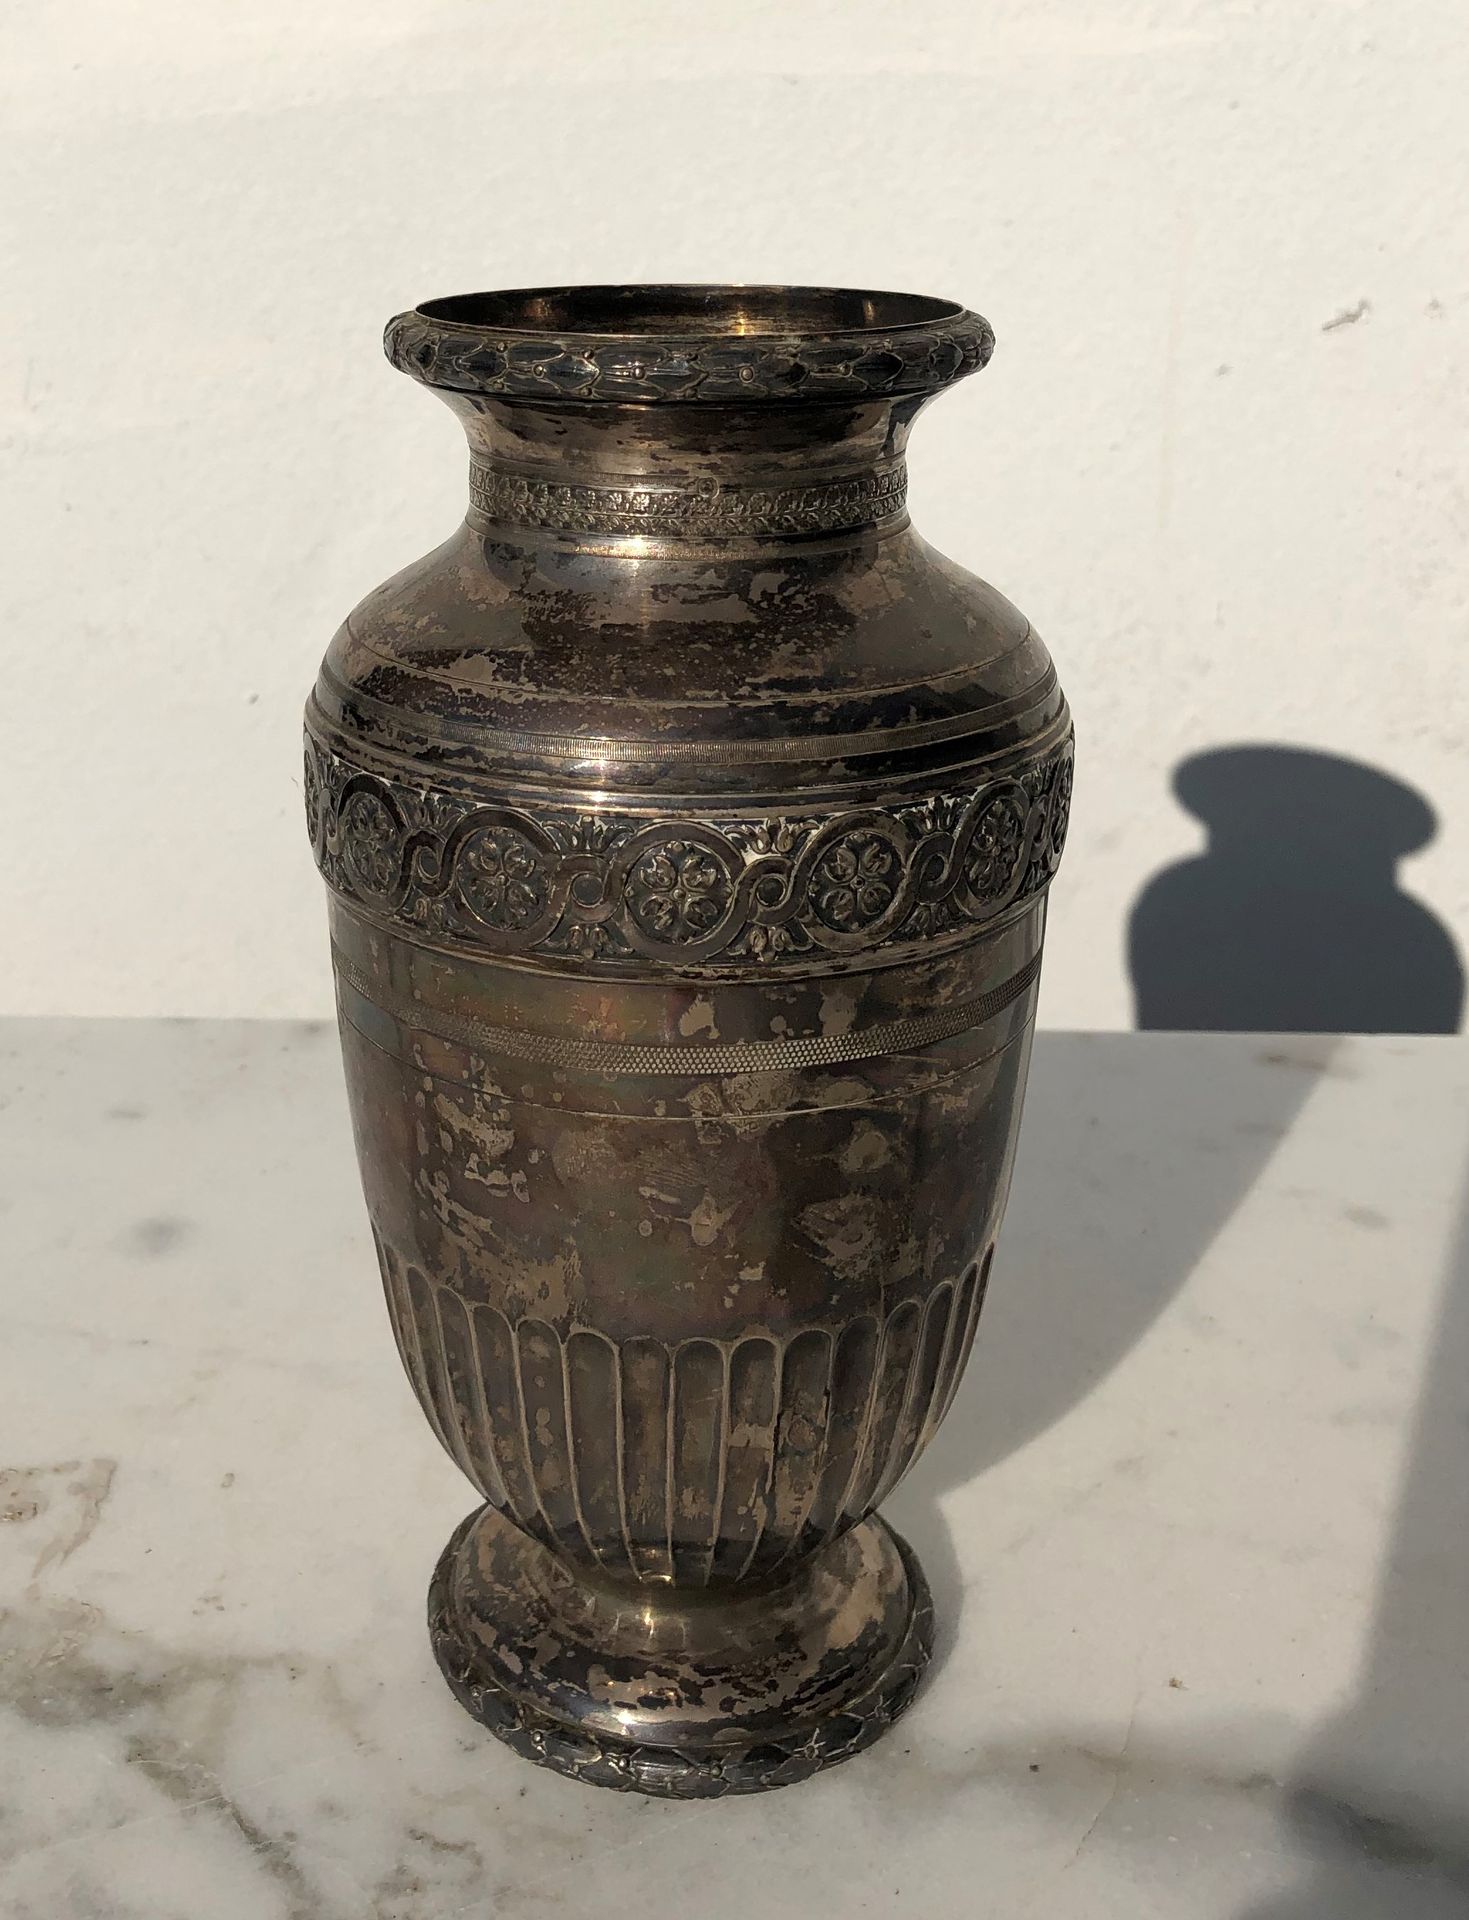 Null Lot including:

- Silver vase 1st title 925 ‰ decorated with a frieze of fl&hellip;